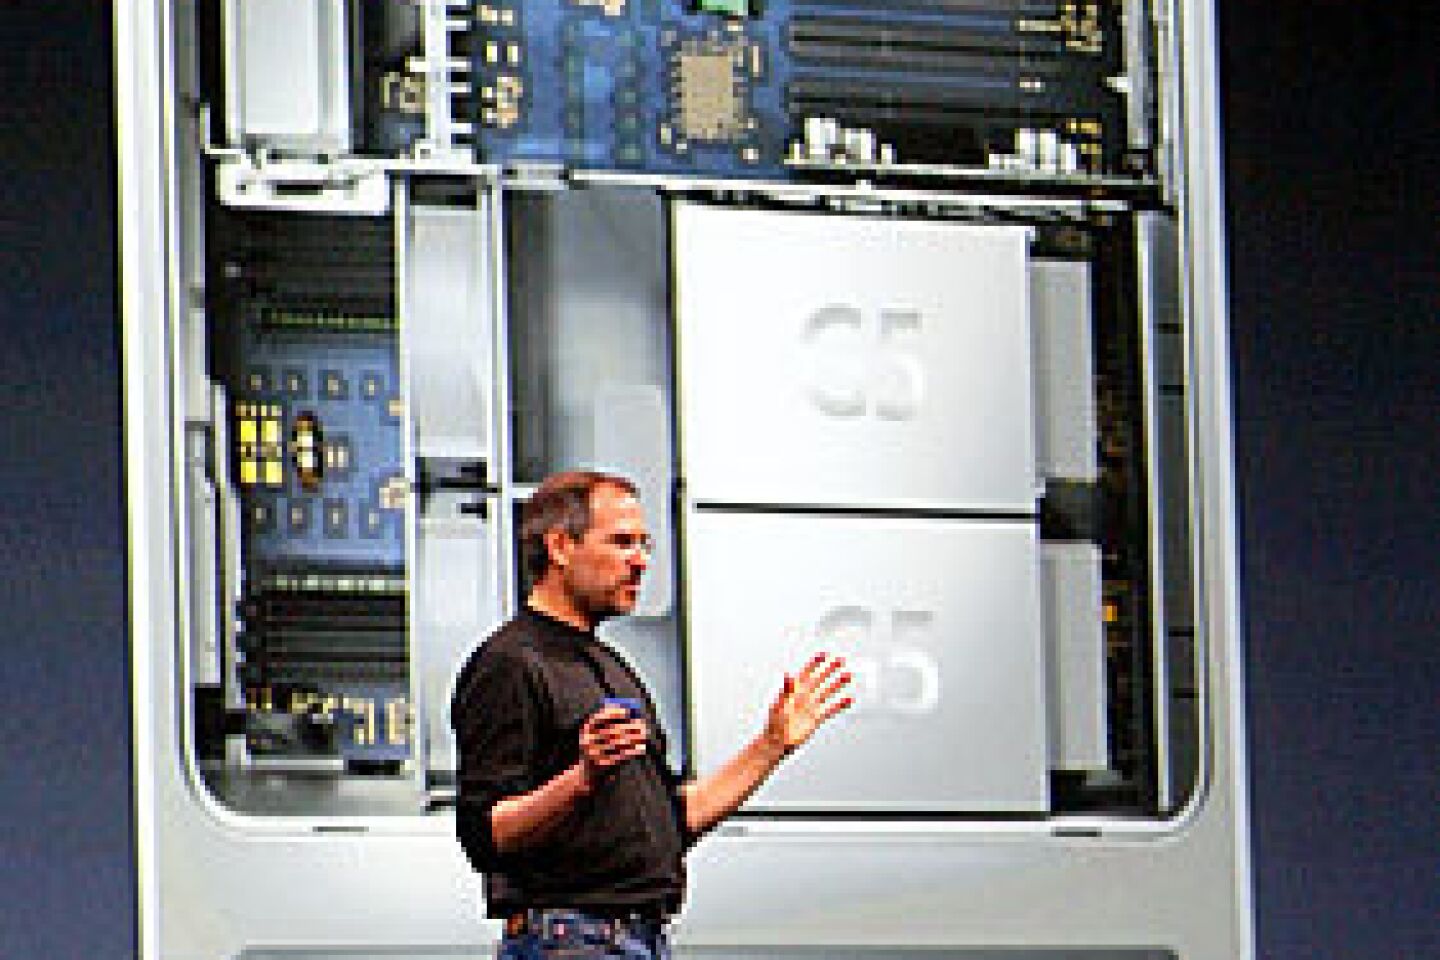 Steve Jobs delivers the keynote address at the Worldwide Developers Conference in San Francisco, announcing the new Power Mac G5 desktop computer.